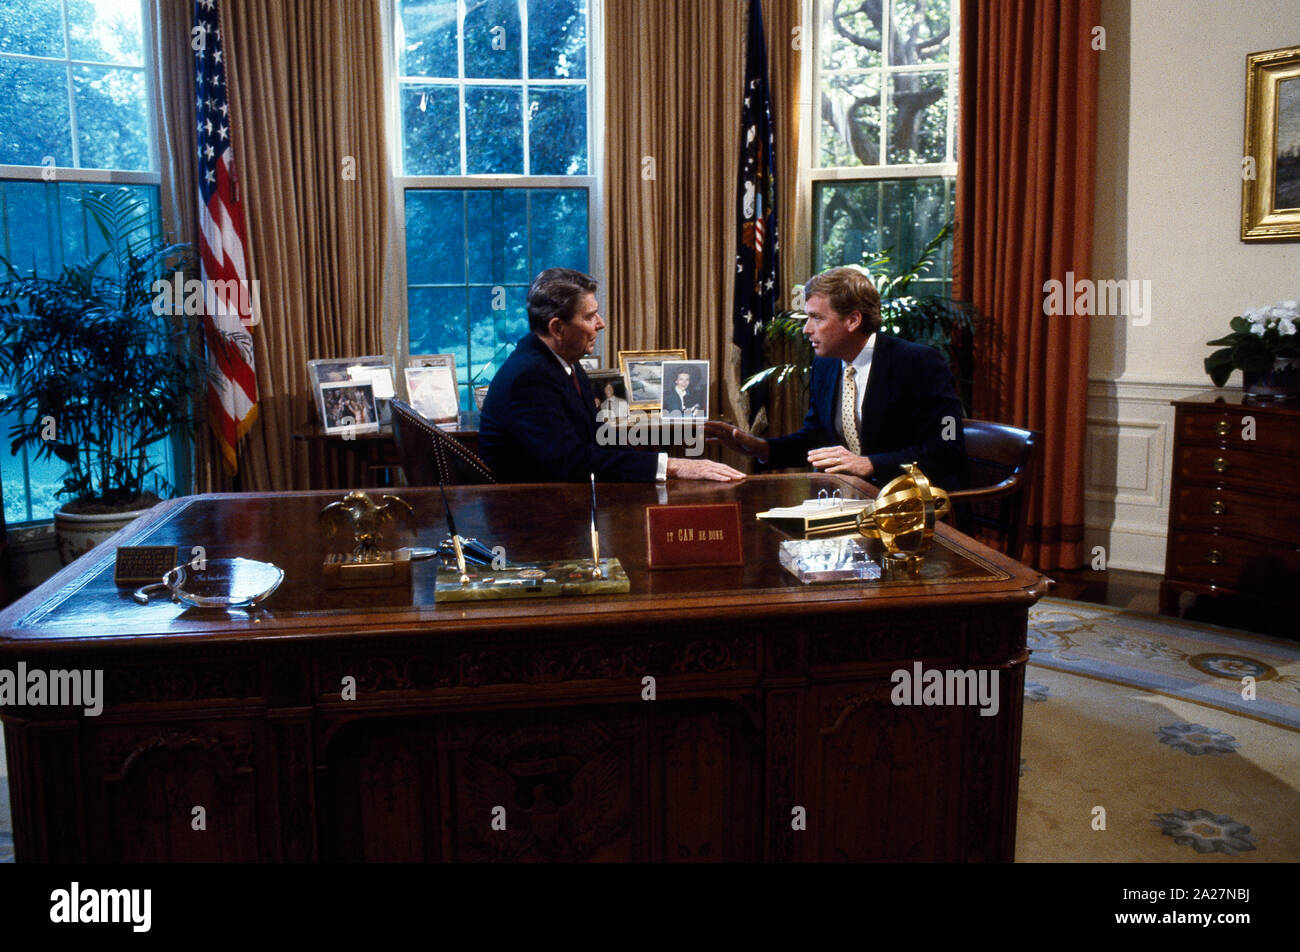 President Ronald Reagan talks to Senator Dan Quayle at his desk in the Oval Office of the White House, Washington, D.C Stock Photo